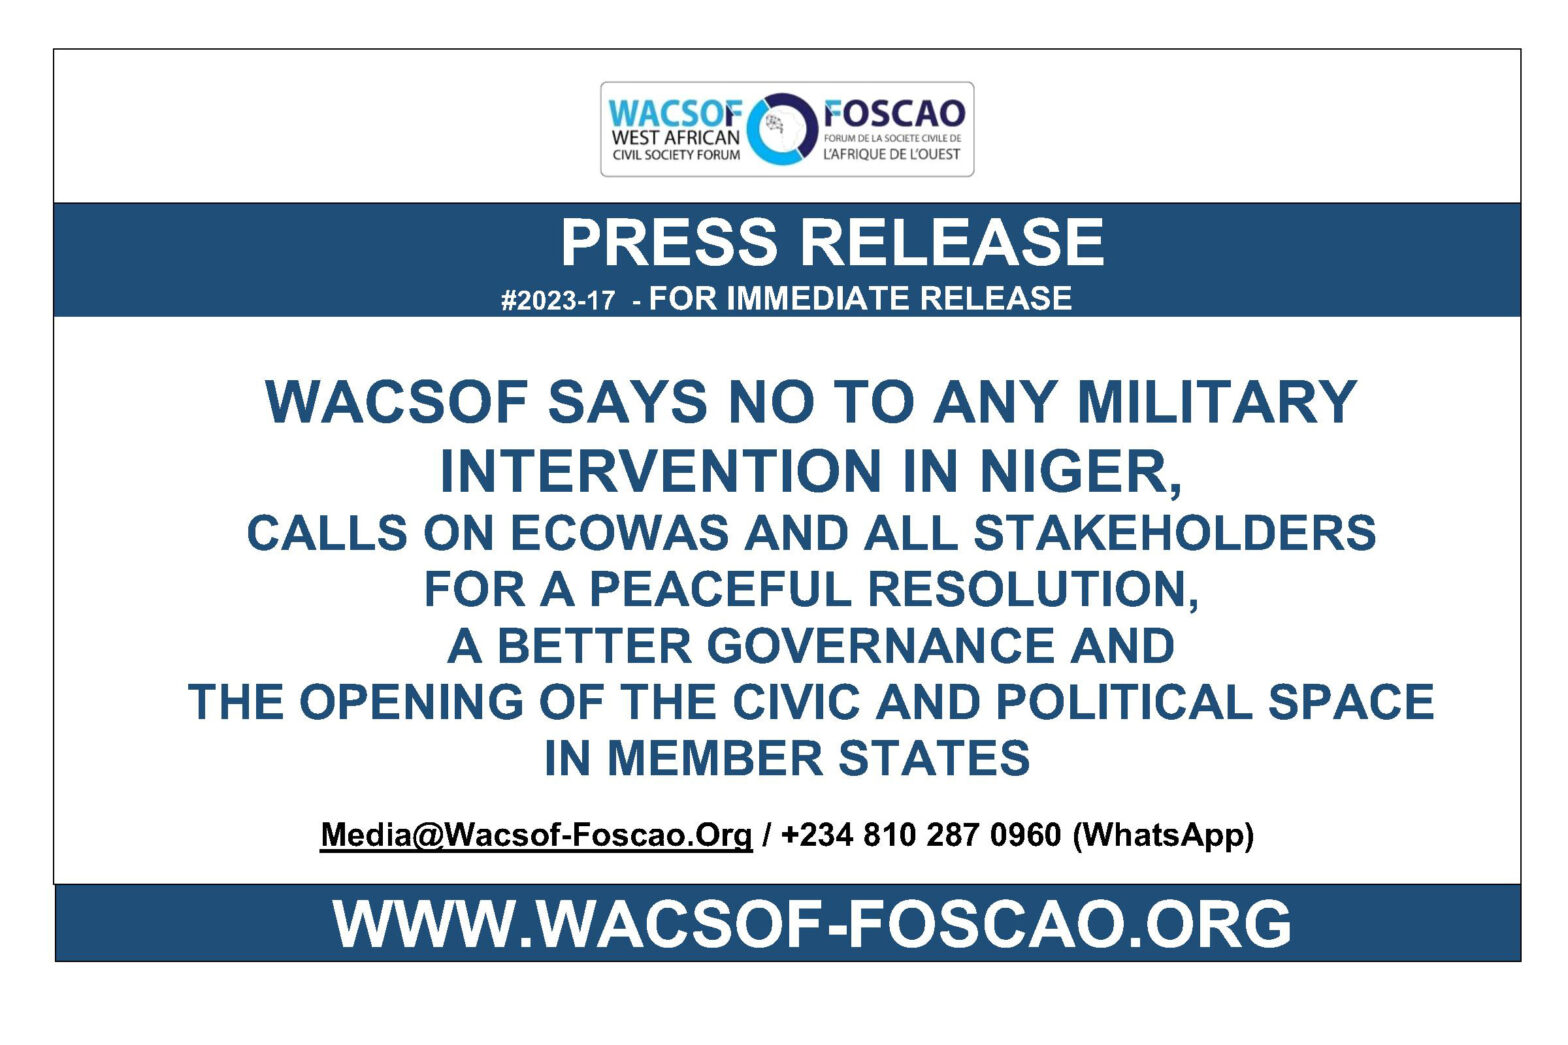 WACSOF SAYS NO TO ANY MILITARY INTERVENTION IN NIGER, CALLS ON ECOWAS FOR A PEACEFUL RESOLUTION, BETTER GOVERNANCE AND THE OPENING OF THE CIVIC SPACE